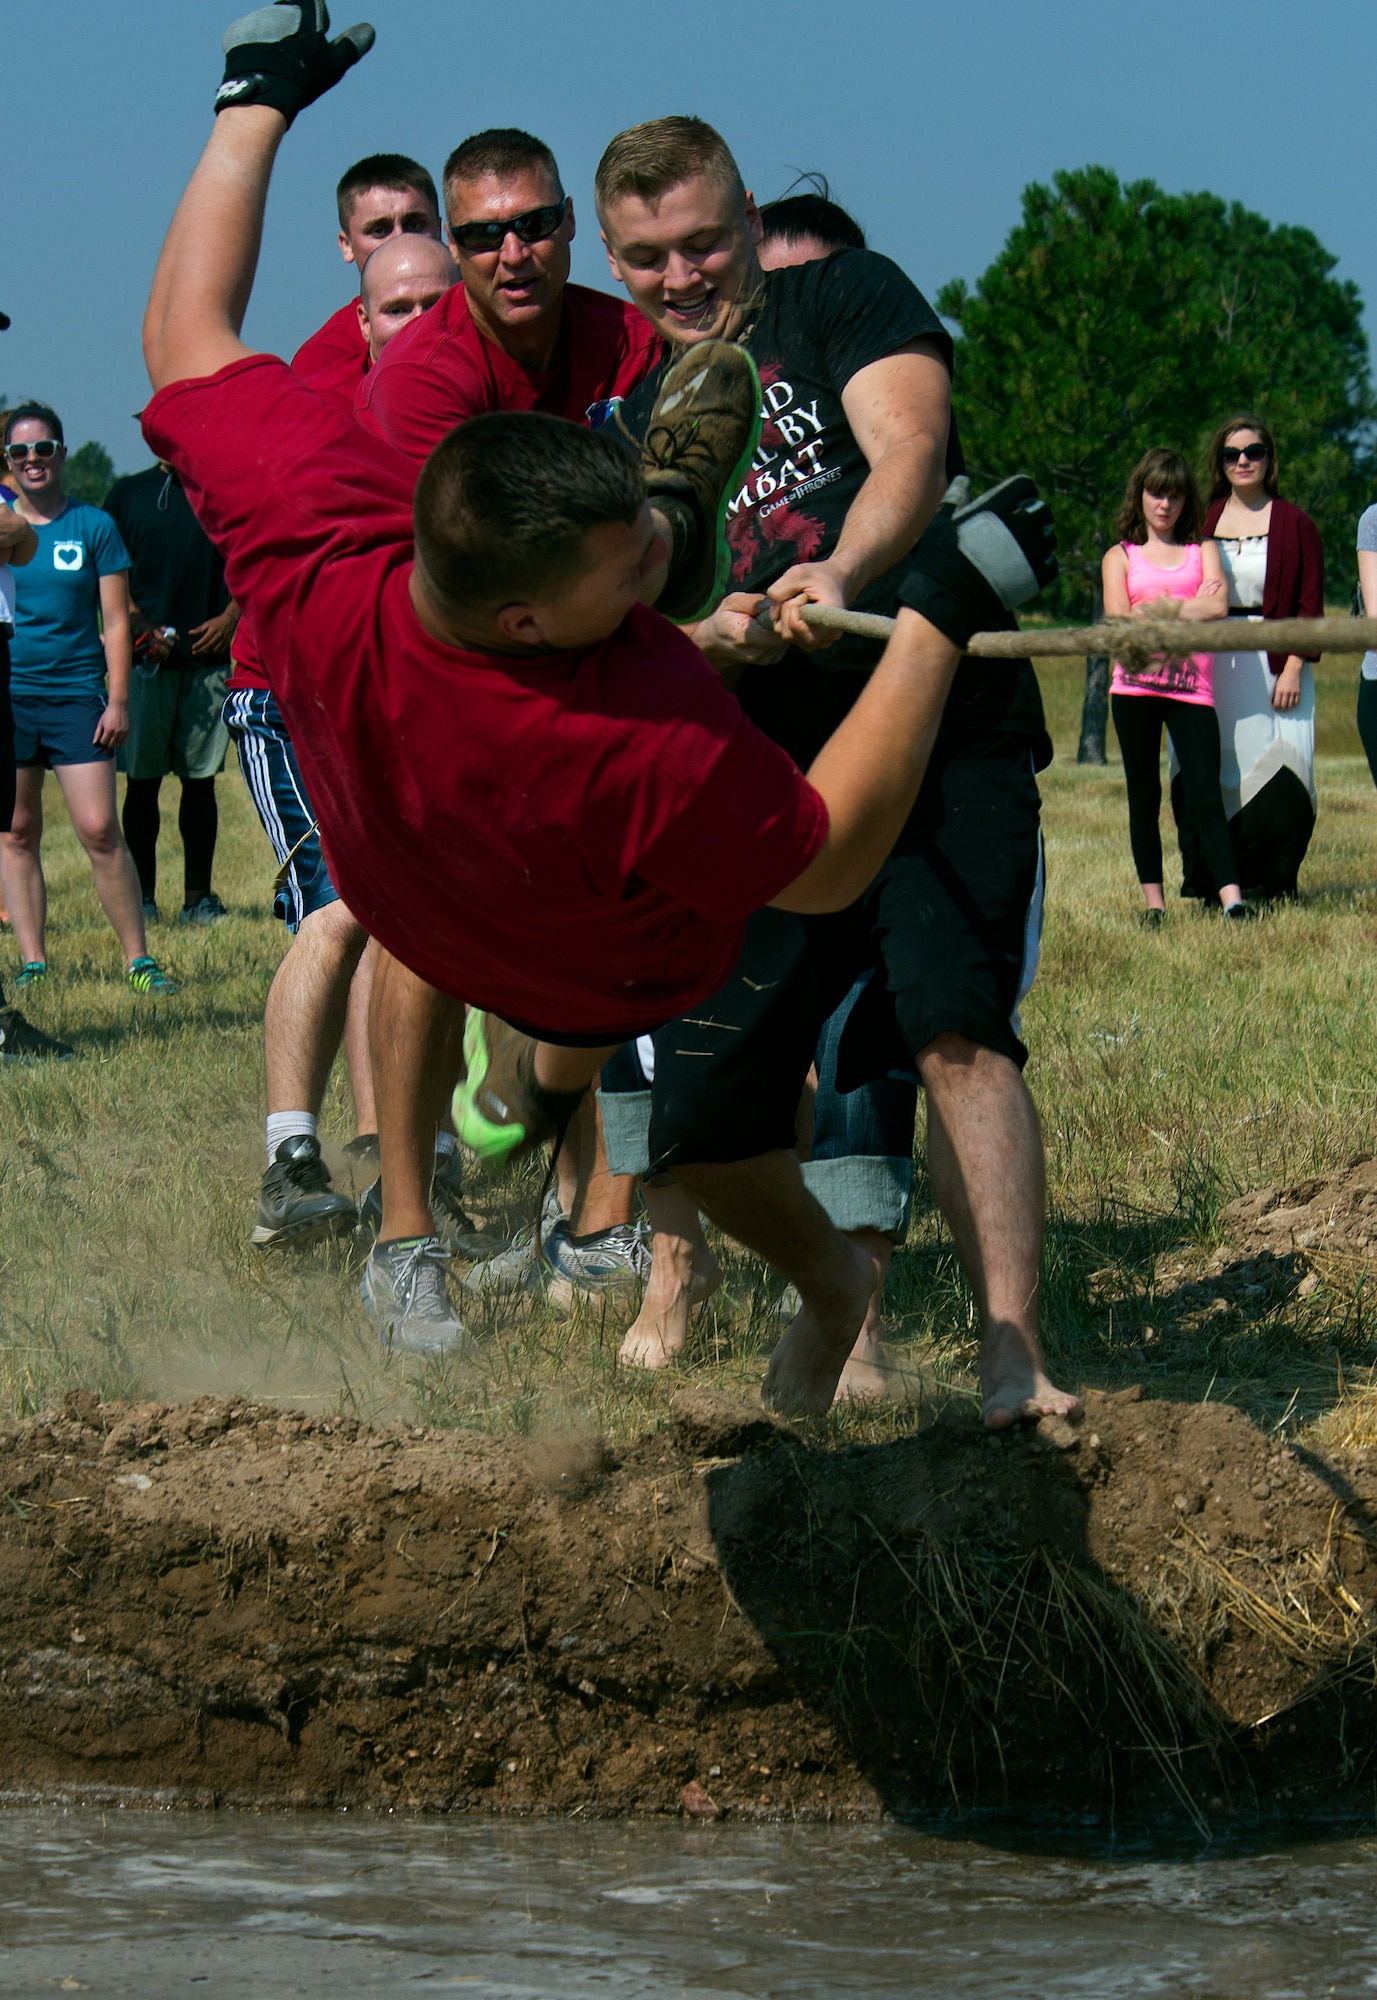 Daniel Davitt, 90th Medical Group, goes airborne into the mud hole when his team loses a tug-of-war match Aug. 21, 2015, during the annual Frontiercade festivities on F.E. Warren Air Force Base, Wyo. Each year, Airmen of the 90th Missile Wing and their families come together to compete in such events as horseshoes, volleyball and a buffalo-chip toss.  (U.S. Air Force photos by R.J. Oriez/Released)